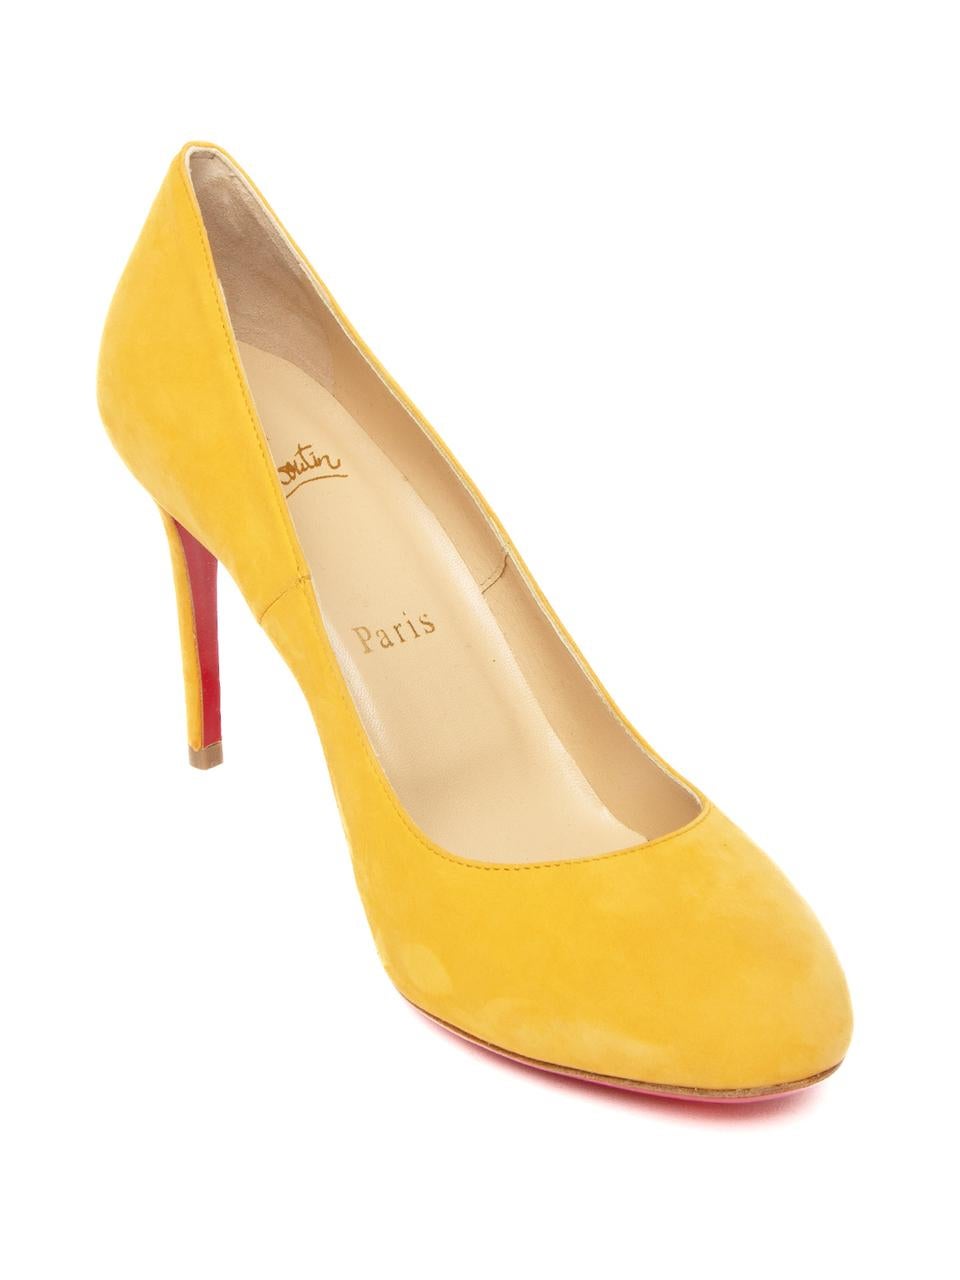 Editors Note Buy into the legendary Christian Louboutin brand with this pair of used Louboutin shoes. Show off the famous Christian Louboutin used red bottoms by making this pair of high end consignment used Christian Louboutin Purple Eloise